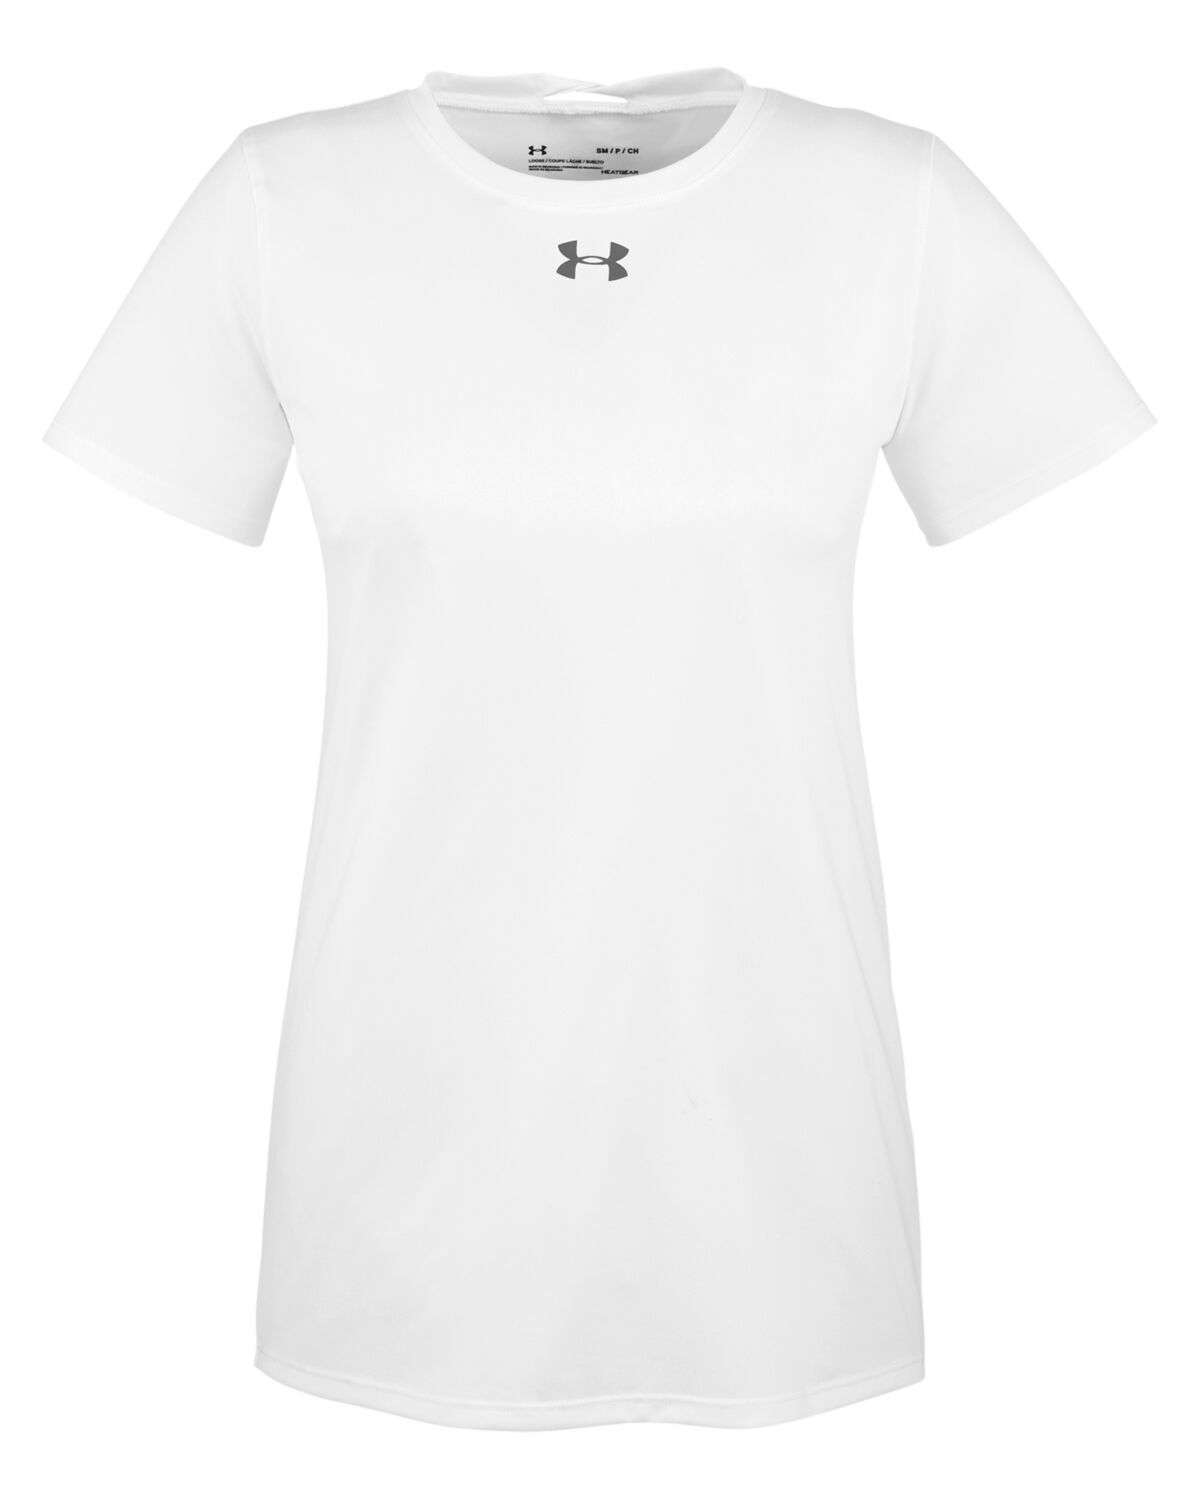 Custom Branded Under Armour T-Shirts - White/Graphite